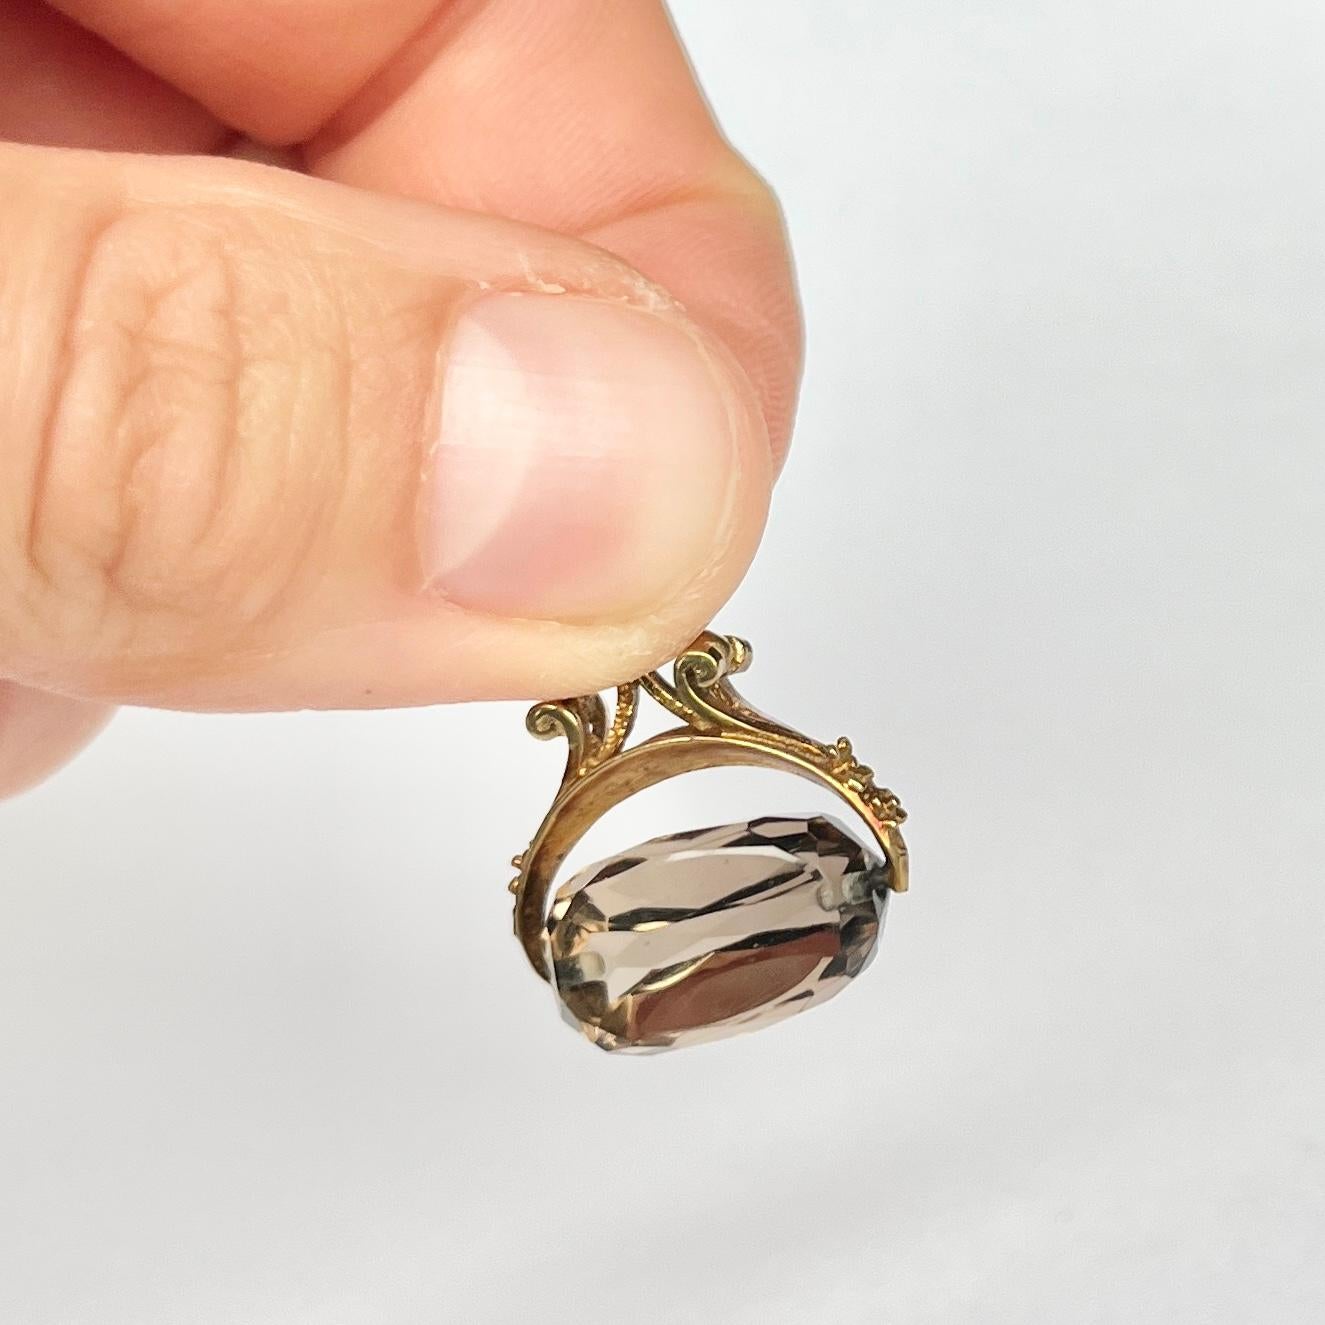 This mini swivel fob holds a smokey quartz stone and the frame is modelled out of 9ct gold and has stunning moulded detail and a grand moulded loop. 

Stone Width: 15mm
Height including Loop: 20mm

Weight: 2.6g 